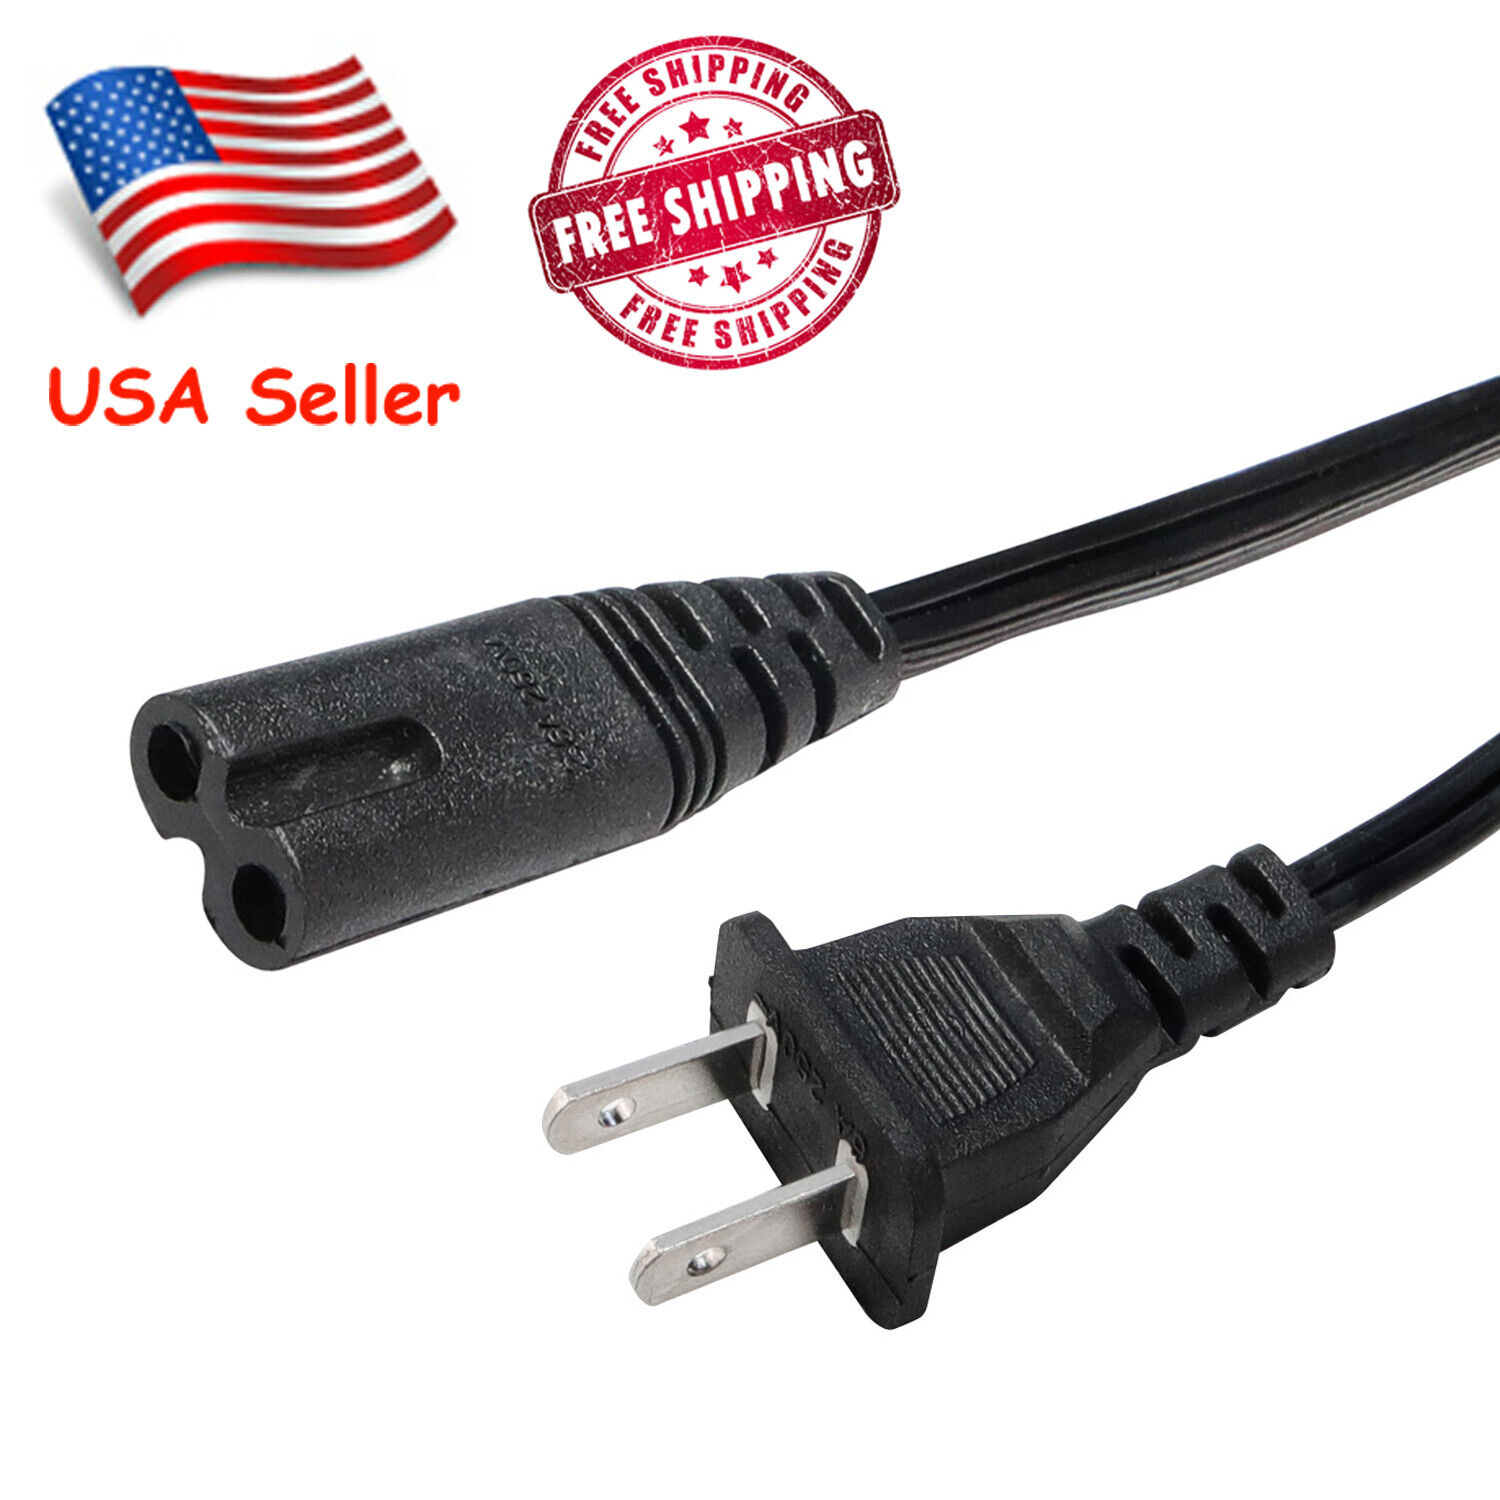 Lot of 1-100 Standard 6ft 2-Prong AC Power Cord/Cable for PS2 PS3 Slim Laptop